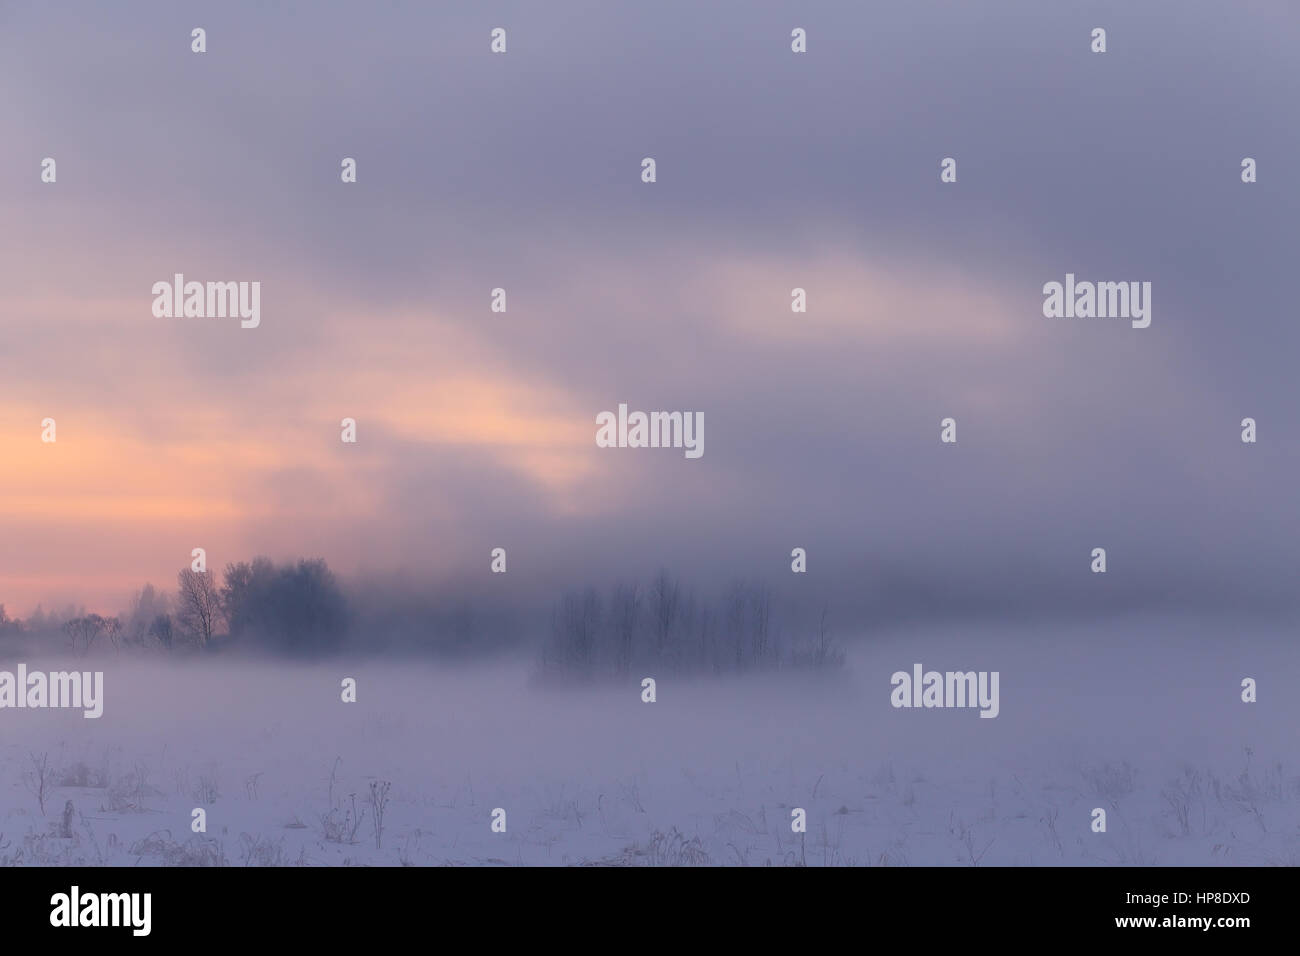 White fog in winter morning. Mist over white snow. Trees with hoarfrost in mist. Foggy winter landscape. Misty winter background. Stock Photo